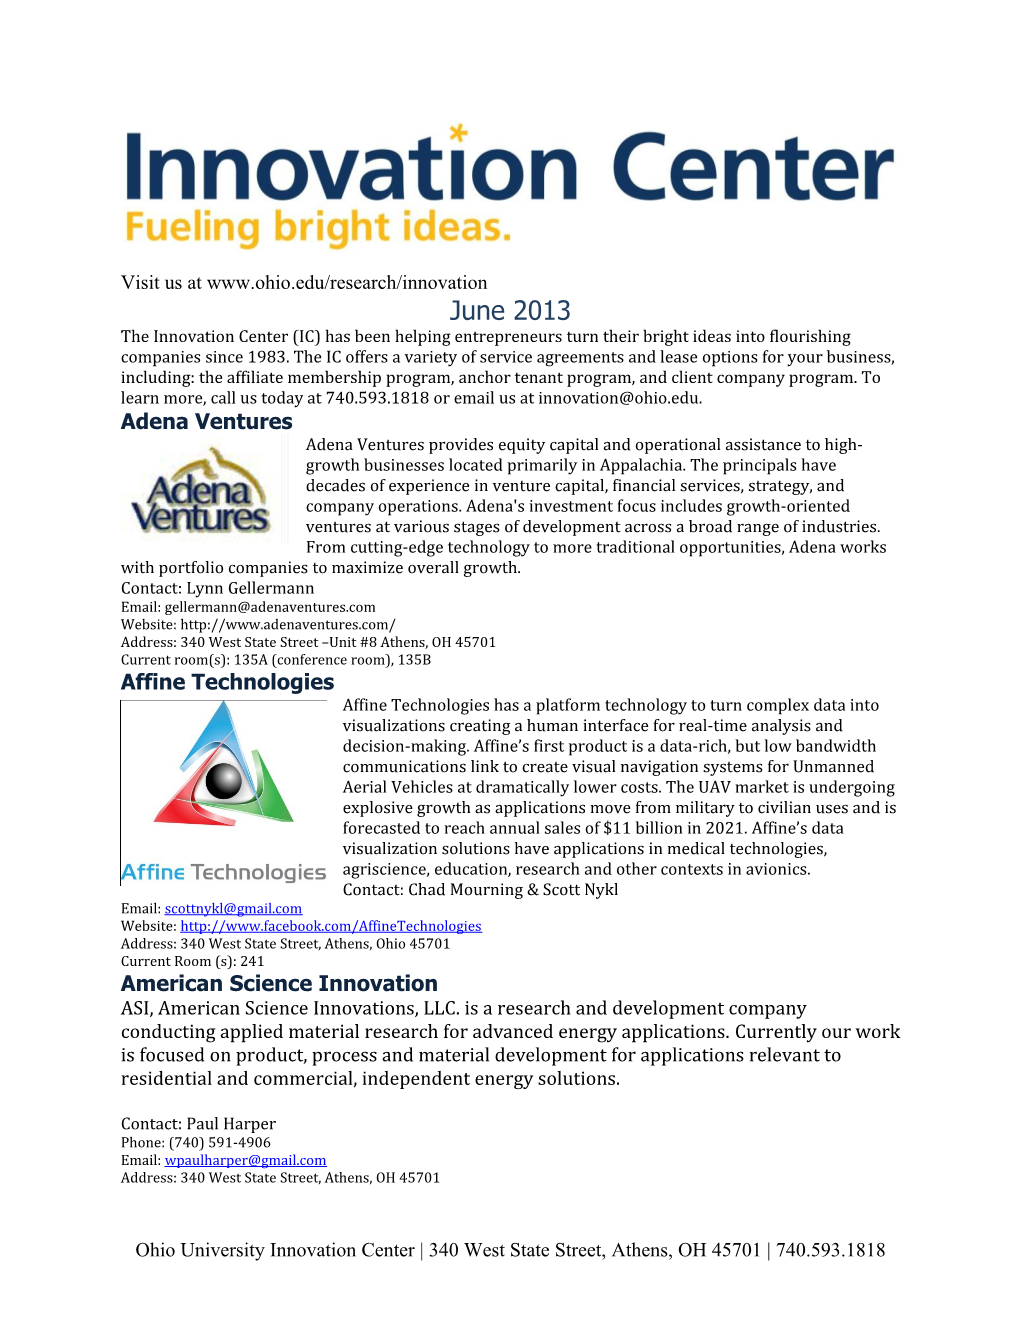 The Innovation Center (IC) Has Been Helping Entrepreneurs Turn Their Bright Ideas Into